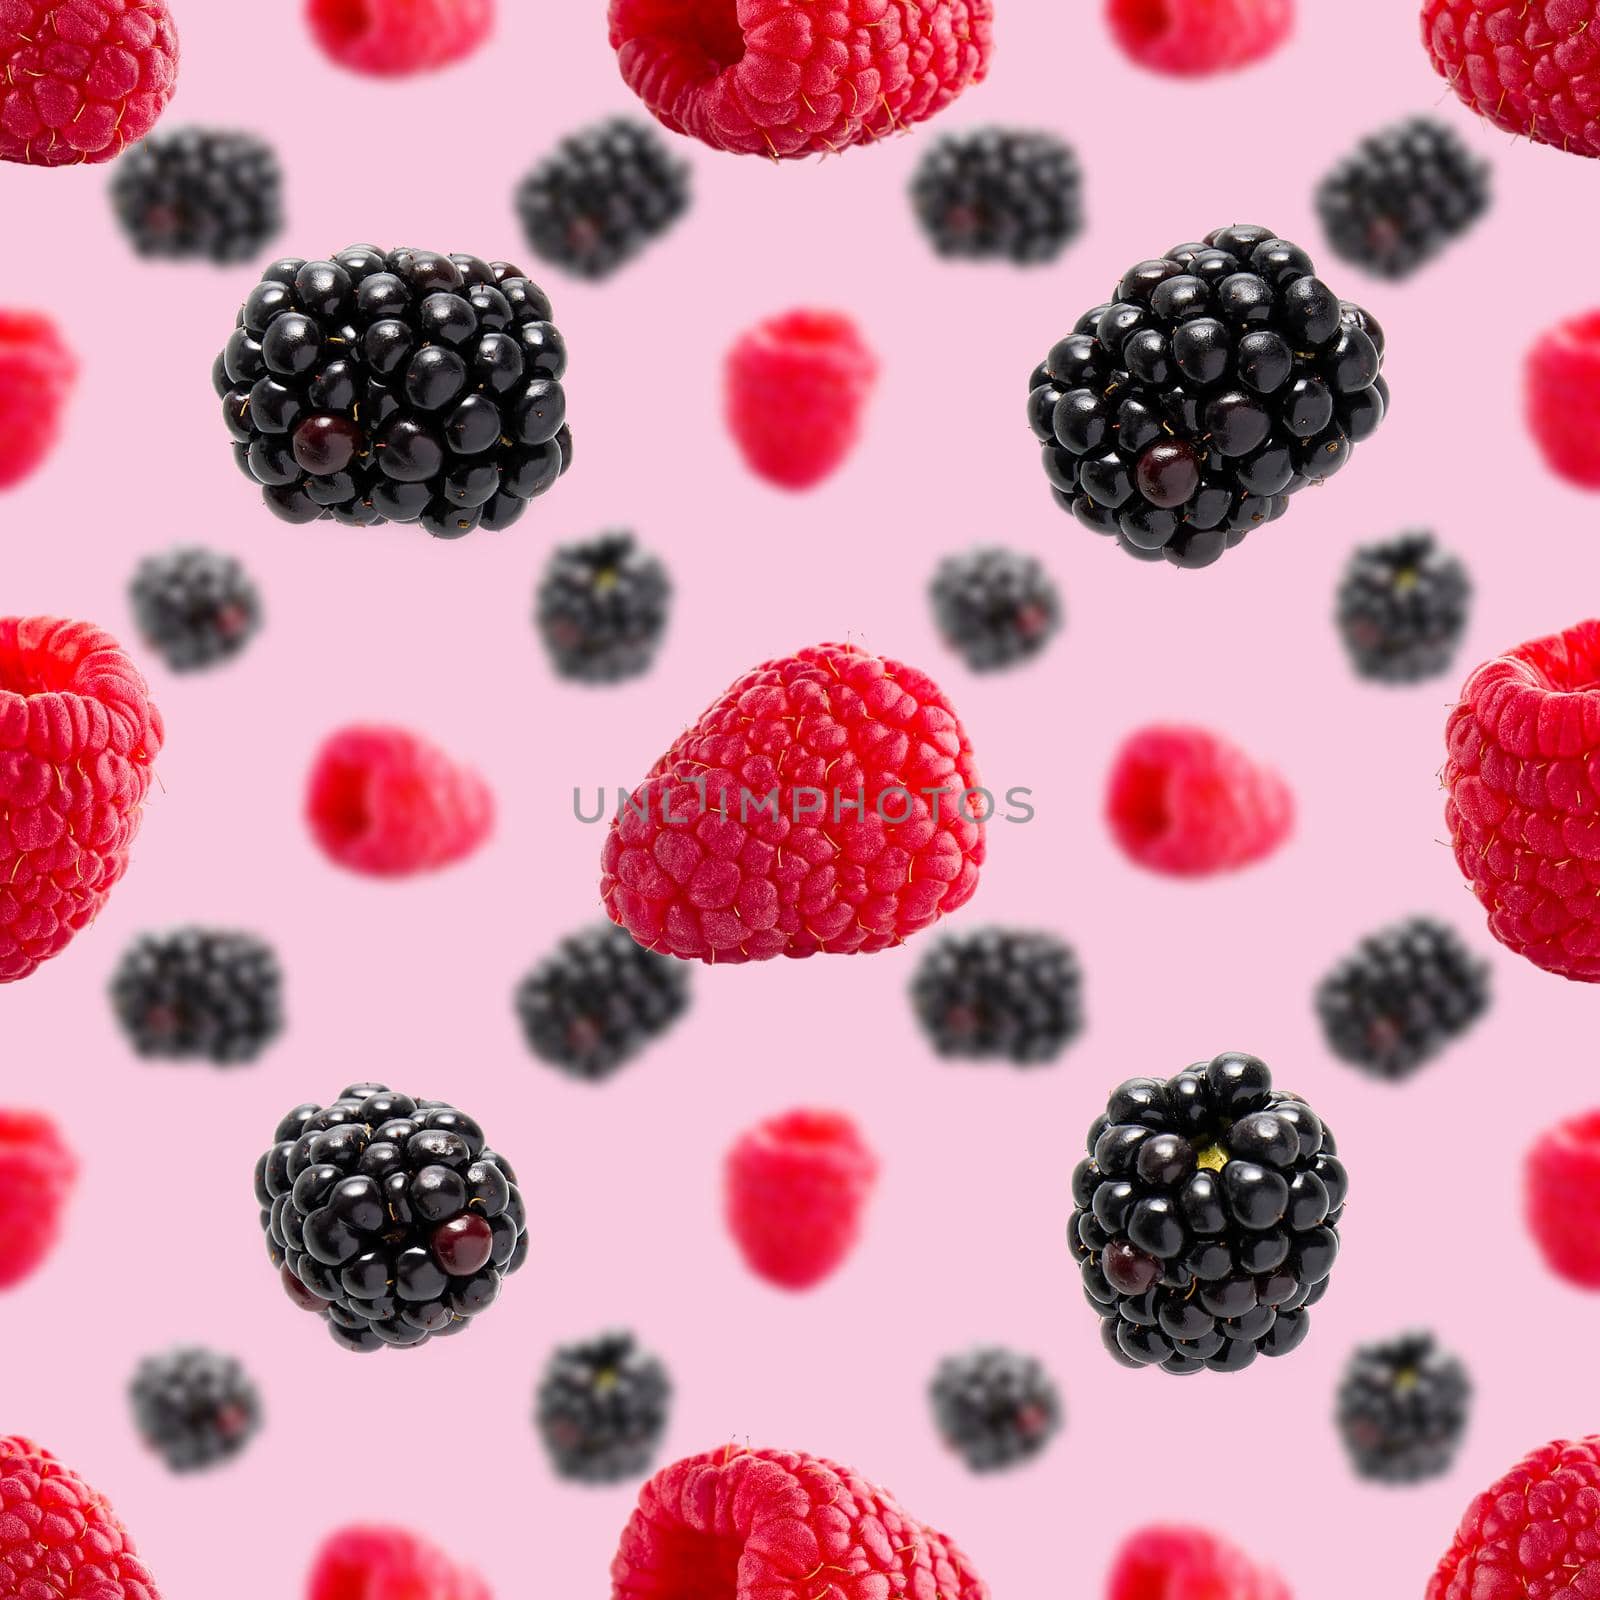 Seamless pattern with ripe raspberry and bramble. Berries abstract background. Raspberry and bramble pattern for package design with pink background.